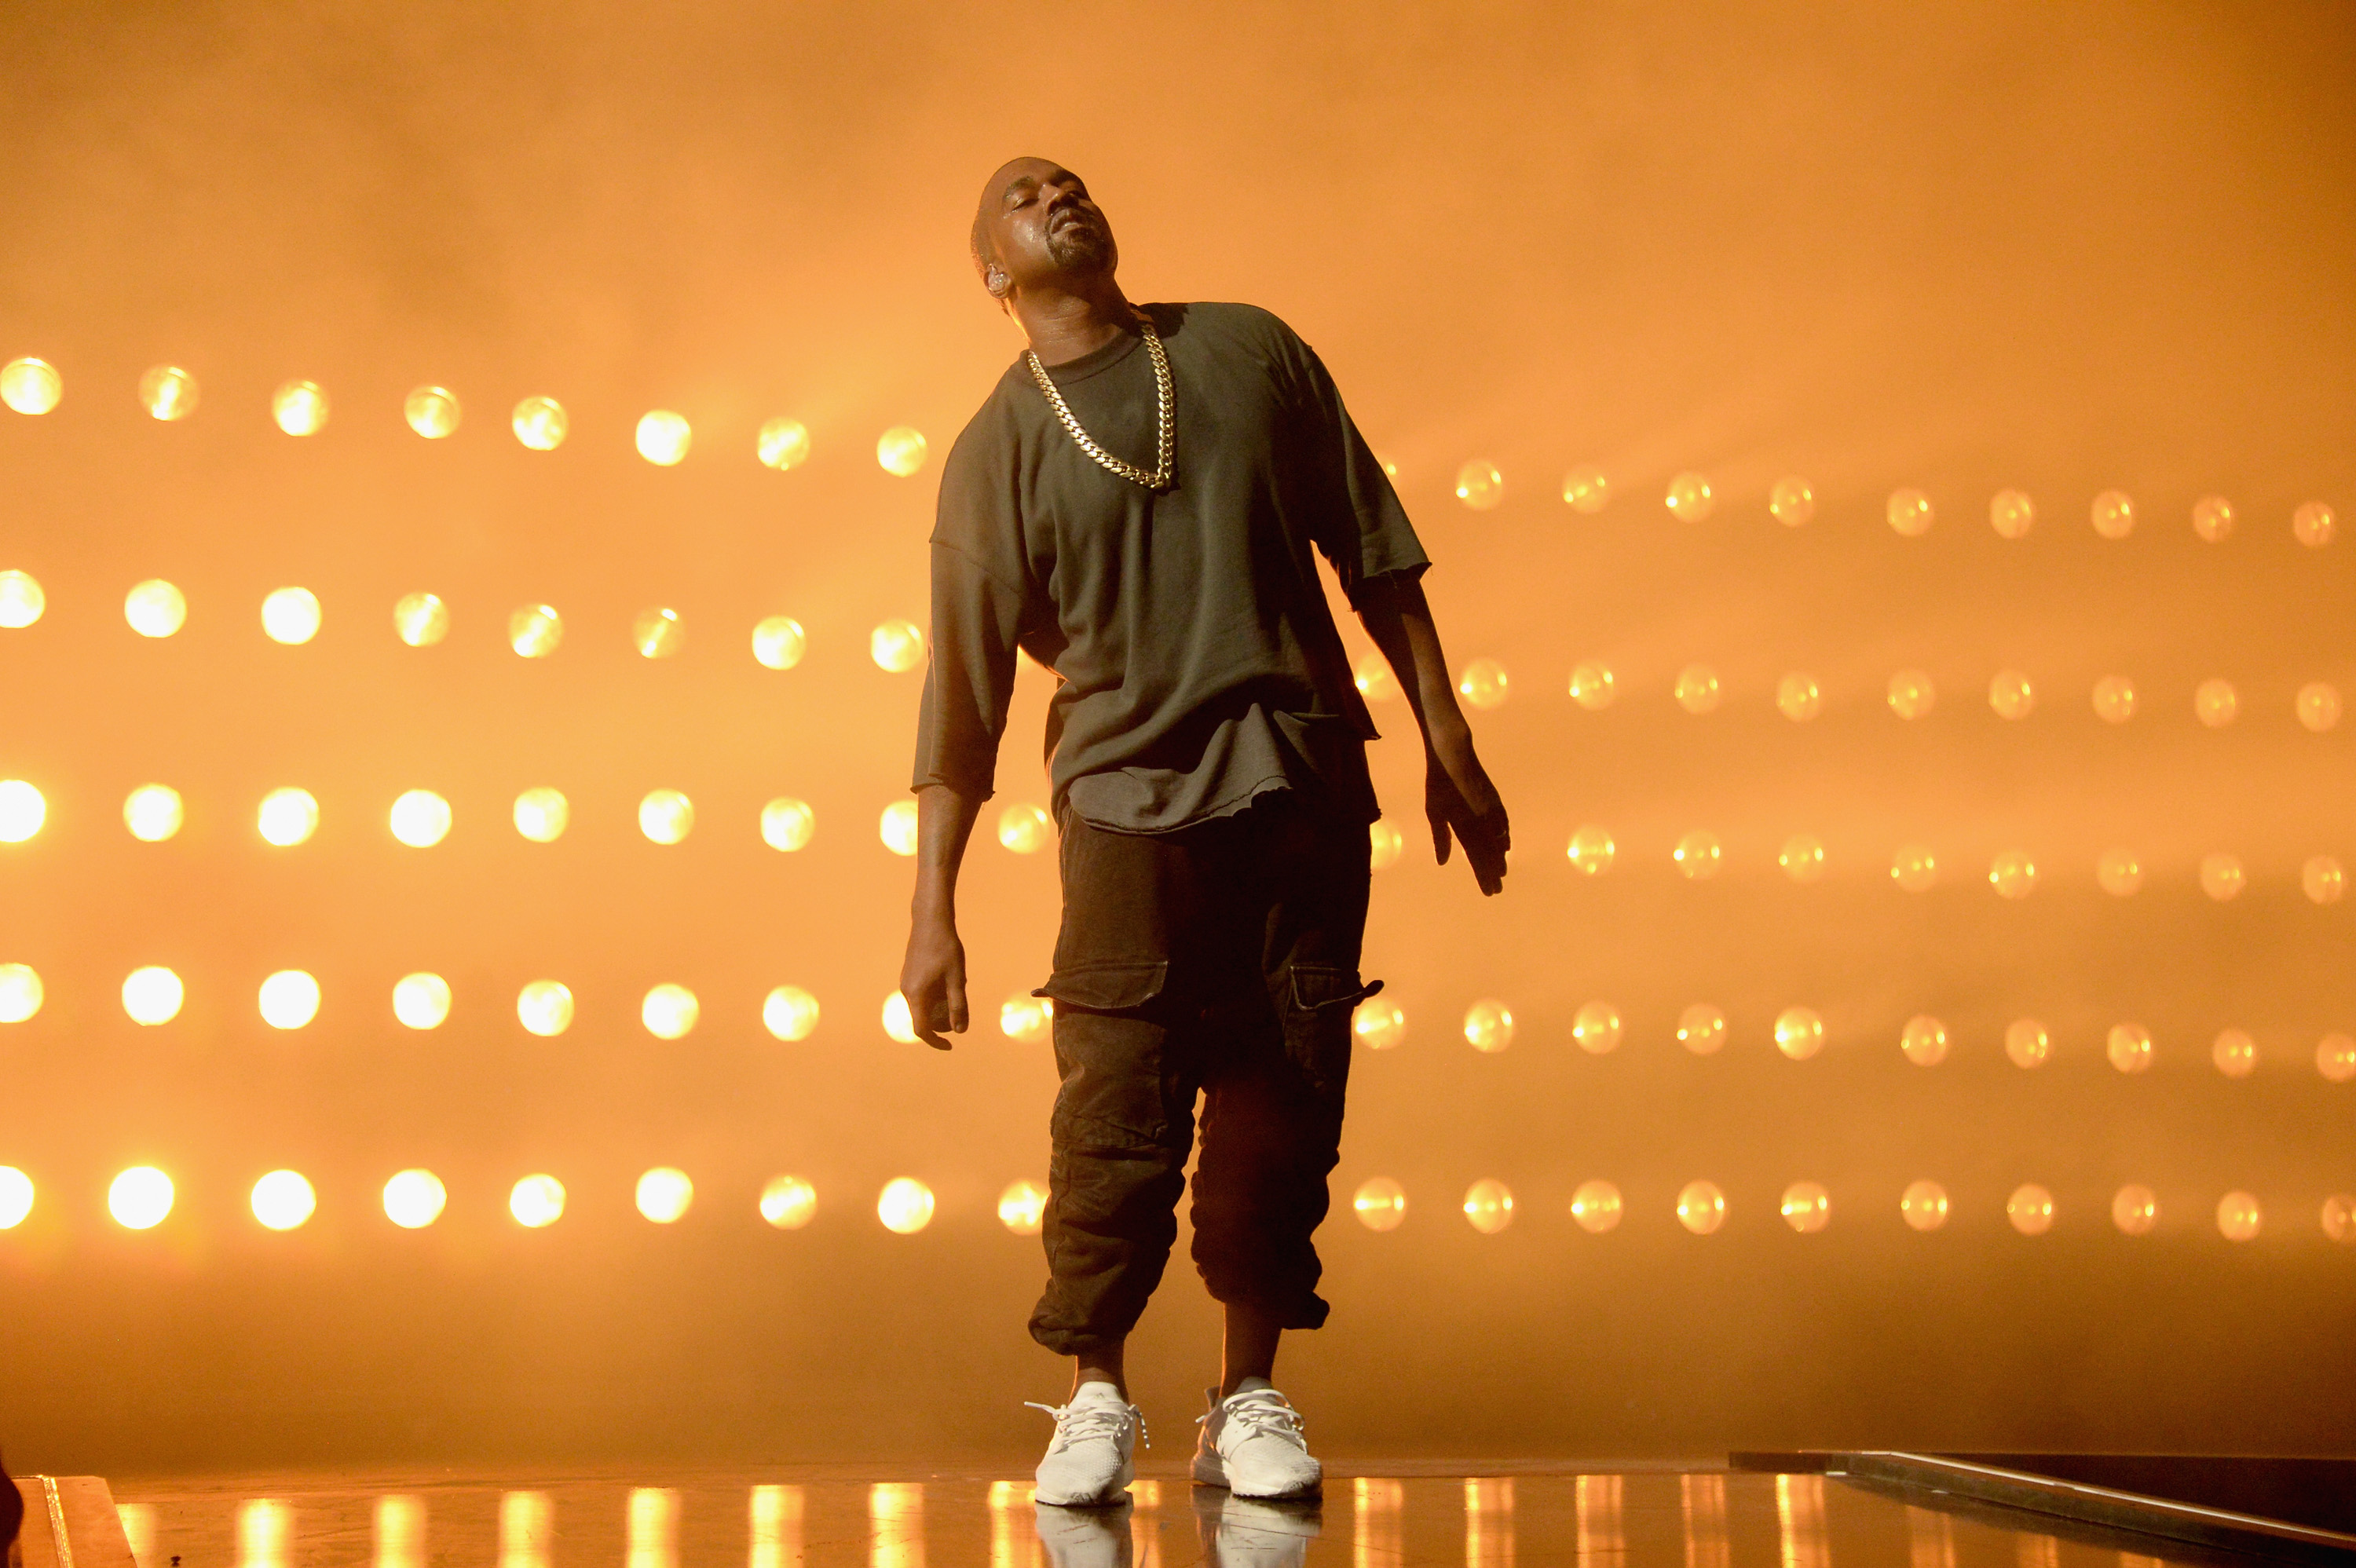 Kanye West performs onstage at the 2015 iHeartRadio Music Festival at MGM Grand Garden Arena on September 18, 2015 in Las Vegas, Nevada.  (Photo by Kevin Mazur/WireImage) (Kevin Mazur&mdash;WireImage)